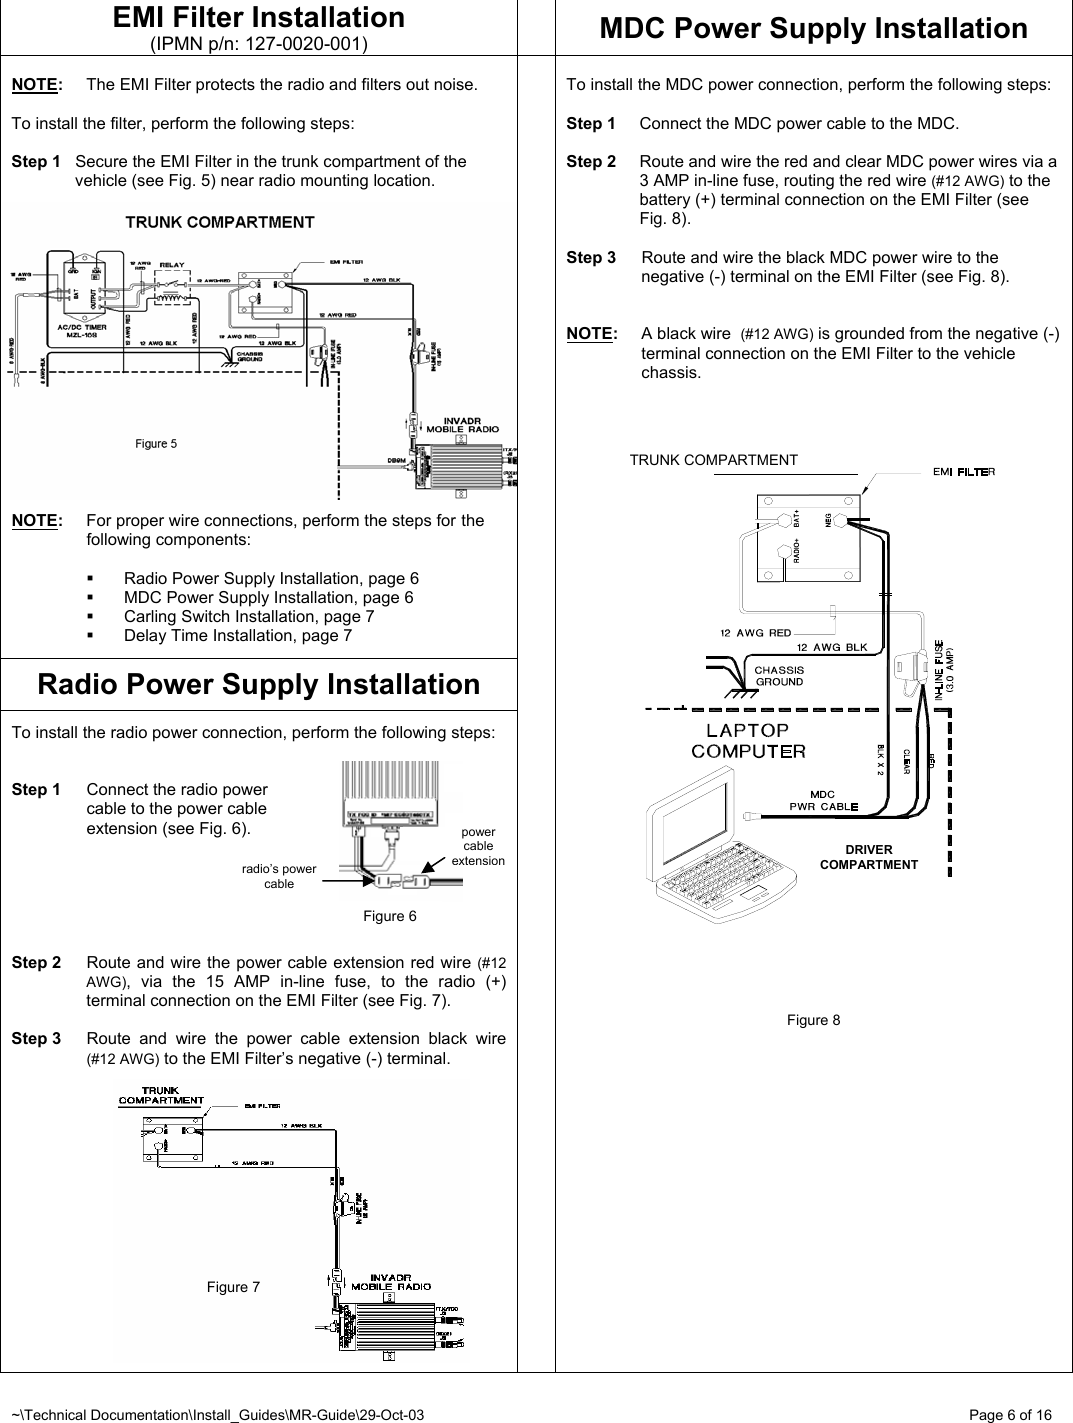 ~\Technical Documentation\Install_Guides\MR-Guide\29-Oct-03   Page 6 of 16 DRIVER COMPARTMENT TRUNK COMPARTMENT EMI Filter Installation (IPMN p/n: 127-0020-001)  MDC Power Supply Installation  NOTE:  The EMI Filter protects the radio and filters out noise.  To install the filter, perform the following steps:  Step 1  Secure the EMI Filter in the trunk compartment of the vehicle (see Fig. 5) near radio mounting location.   NOTE:  For proper wire connections, perform the steps for  the  following components:    Radio Power Supply Installation, page 6   MDC Power Supply Installation, page 6   Carling Switch Installation, page 7   Delay Time Installation, page 7  Radio Power Supply Installation  To install the radio power connection, perform the following steps:   Step 1  Connect the radio power   cable to the power cable    extension (see Fig. 6).       Step 2  Route and wire the power cable extension red wire (#12 AWG), via the 15 AMP in-line fuse, to the radio (+) terminal connection on the EMI Filter (see Fig. 7).  Step 3  Route and wire the power cable extension black wire (#12 AWG) to the EMI Filter’s negative (-) terminal.                                           Figure 7       To install the MDC power connection, perform the following steps:  Step 1  Connect the MDC power cable to the MDC.  Step 2  Route and wire the red and clear MDC power wires via a 3 AMP in-line fuse, routing the red wire (#12 AWG) to the battery (+) terminal connection on the EMI Filter (see Fig. 8).  Step 3  Route and wire the black MDC power wire to the negative (-) terminal on the EMI Filter (see Fig. 8).   NOTE:  A black wire  (#12 AWG) is grounded from the negative (-) terminal connection on the EMI Filter to the vehicle chassis.                                   Figure 8           radio’s power cable power cable extensionFigure 6 